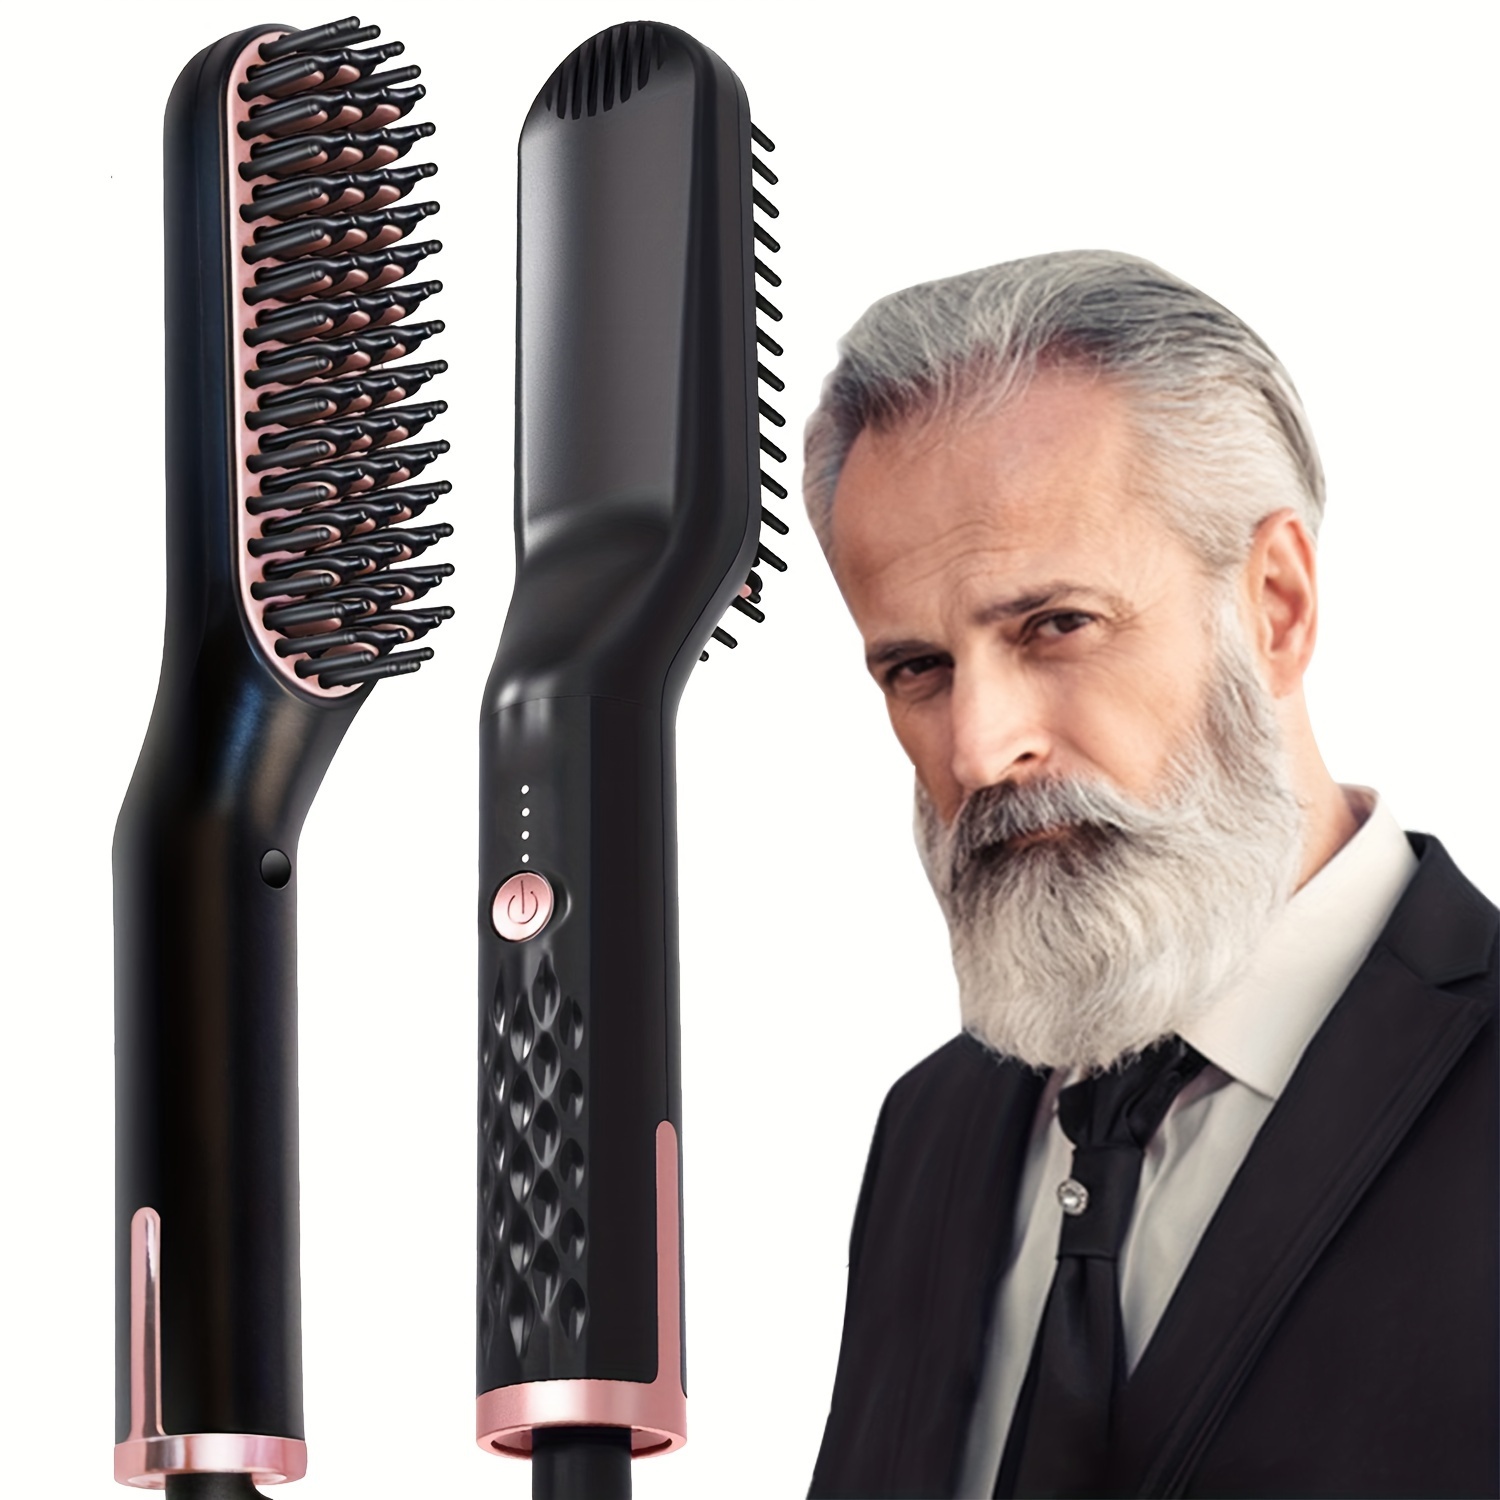 

For Men, Electric Hair Straightening Brush, Fast Heated Ionic Beard Straightening Comb, Portable Men's Hair Styling Brush, Gifs For Men, Father's Day Gift